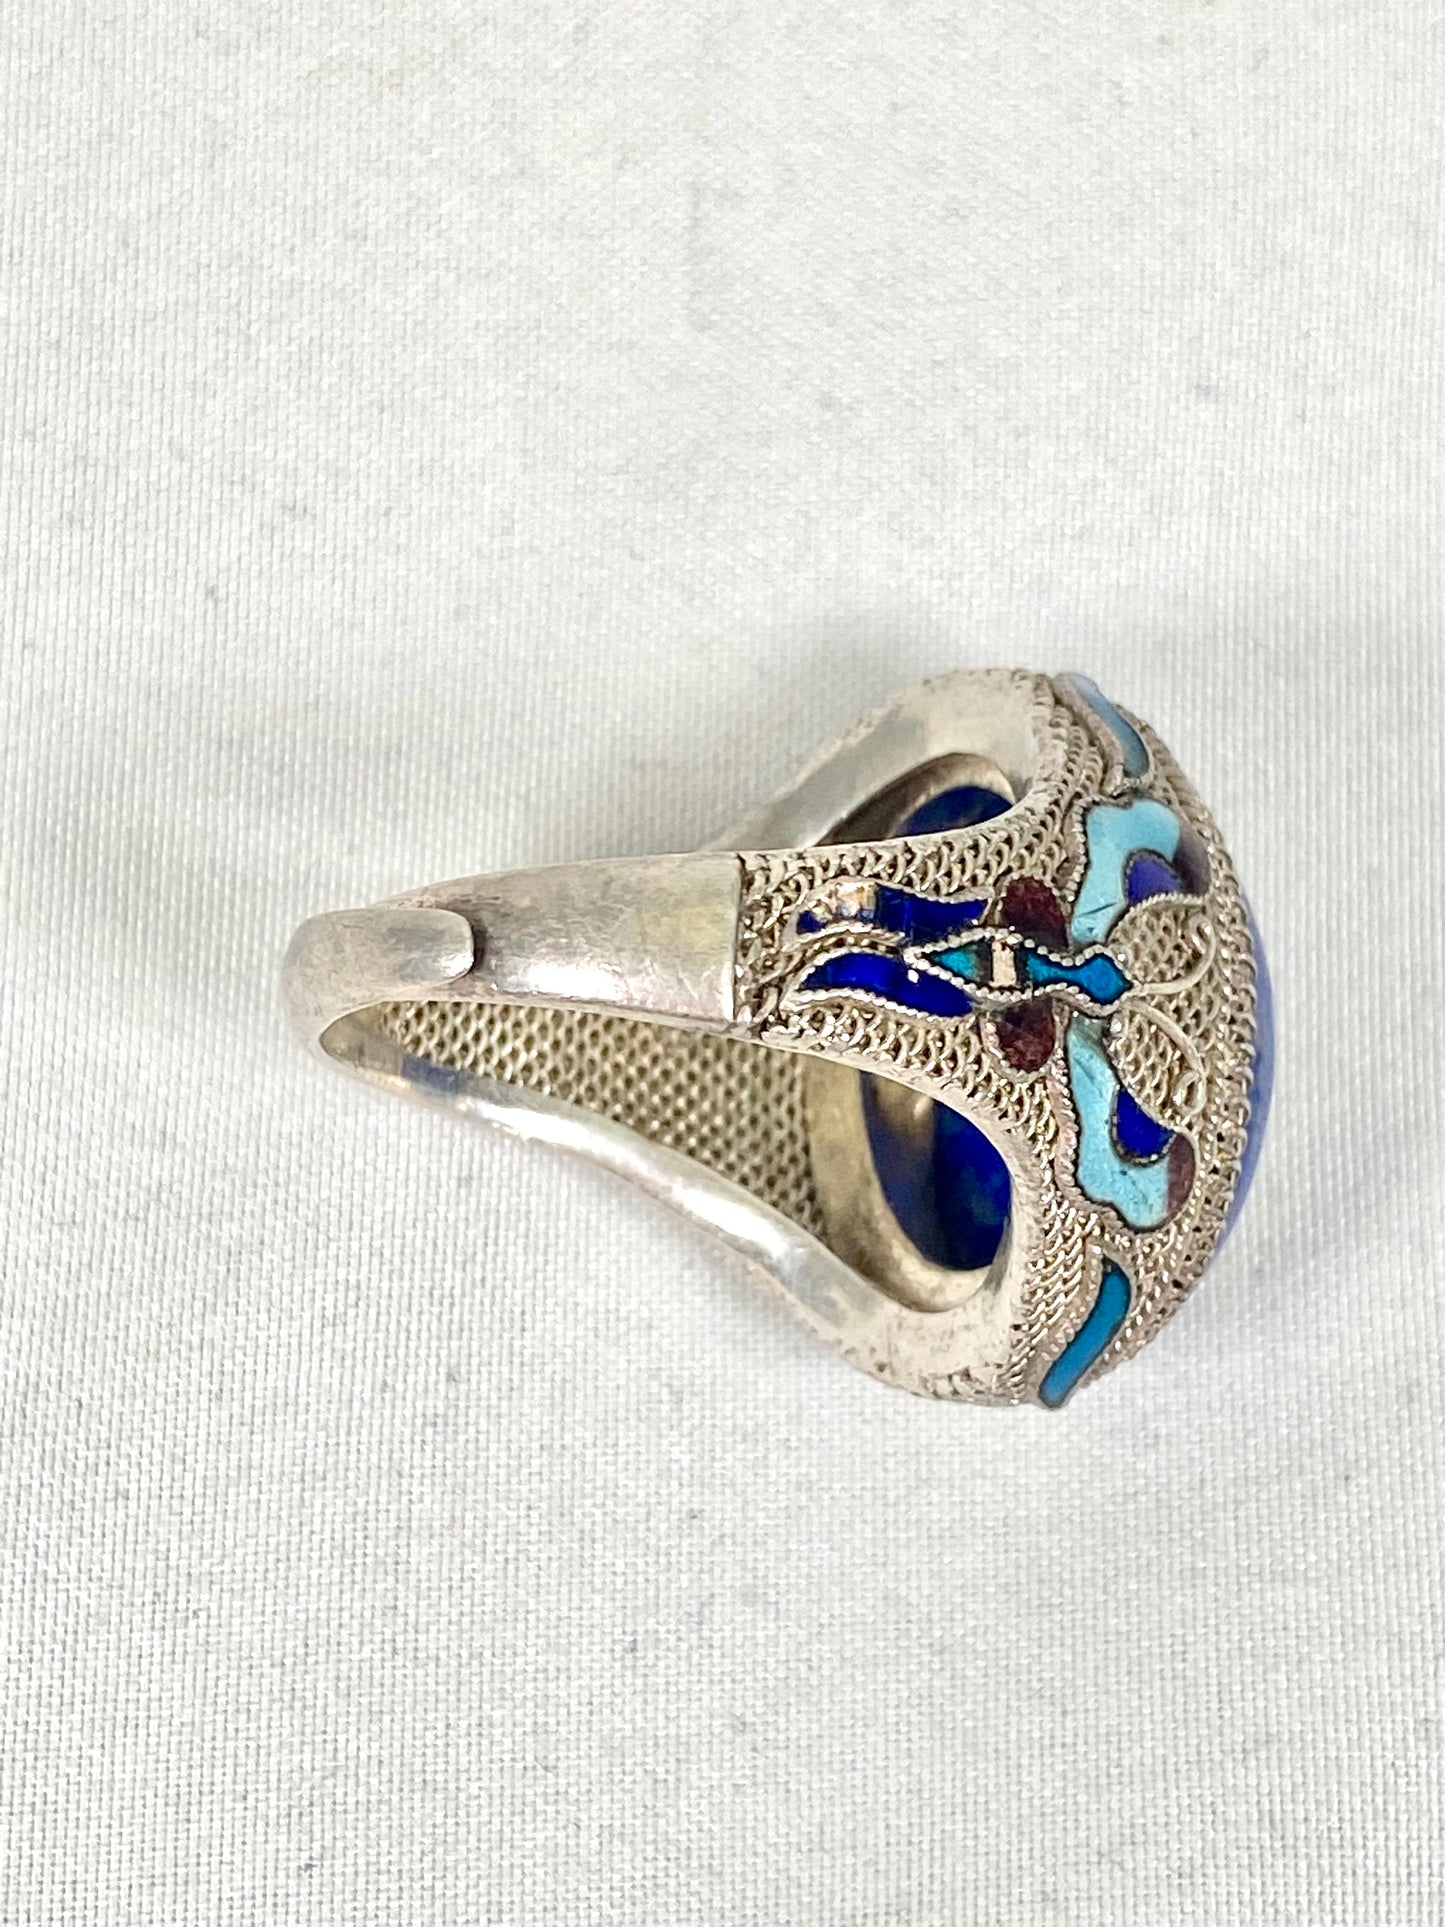 Vintage Near Antique Chinese Export Silver Filigree and Enamel Blue Stone Ring.